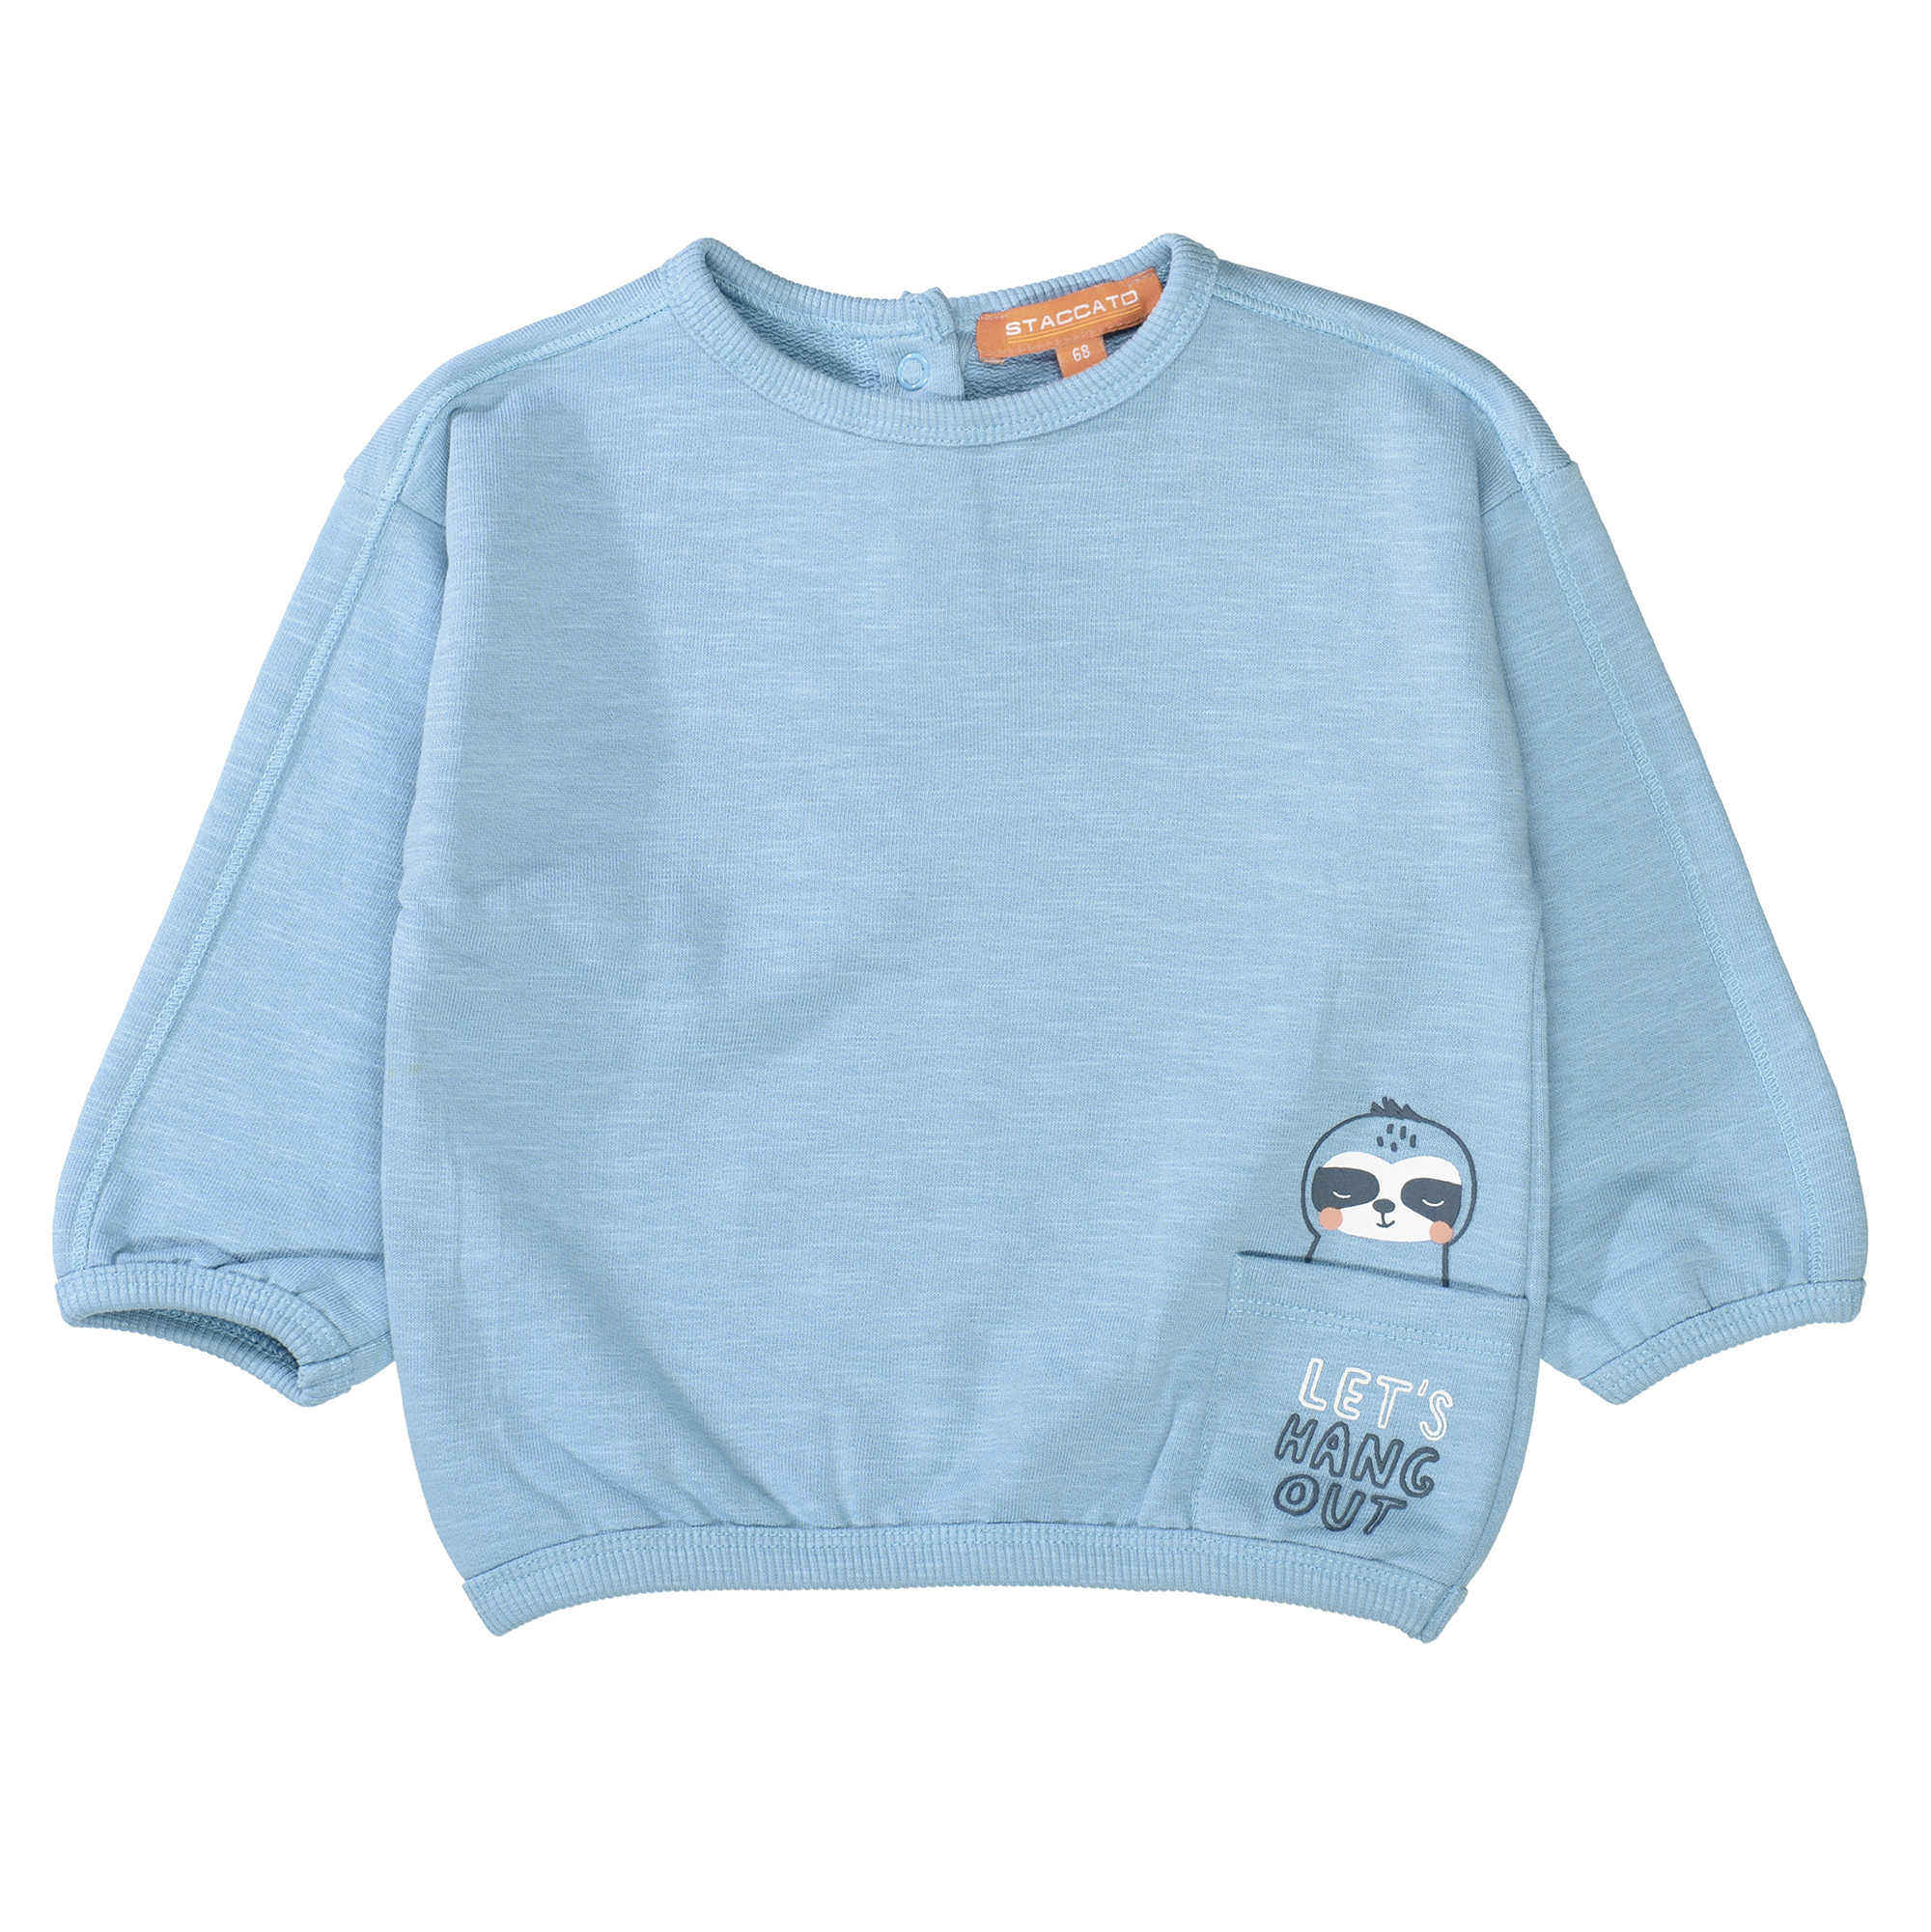 Sweatshirt Let's Hang Out STACCATO Blau M2000585457303 1